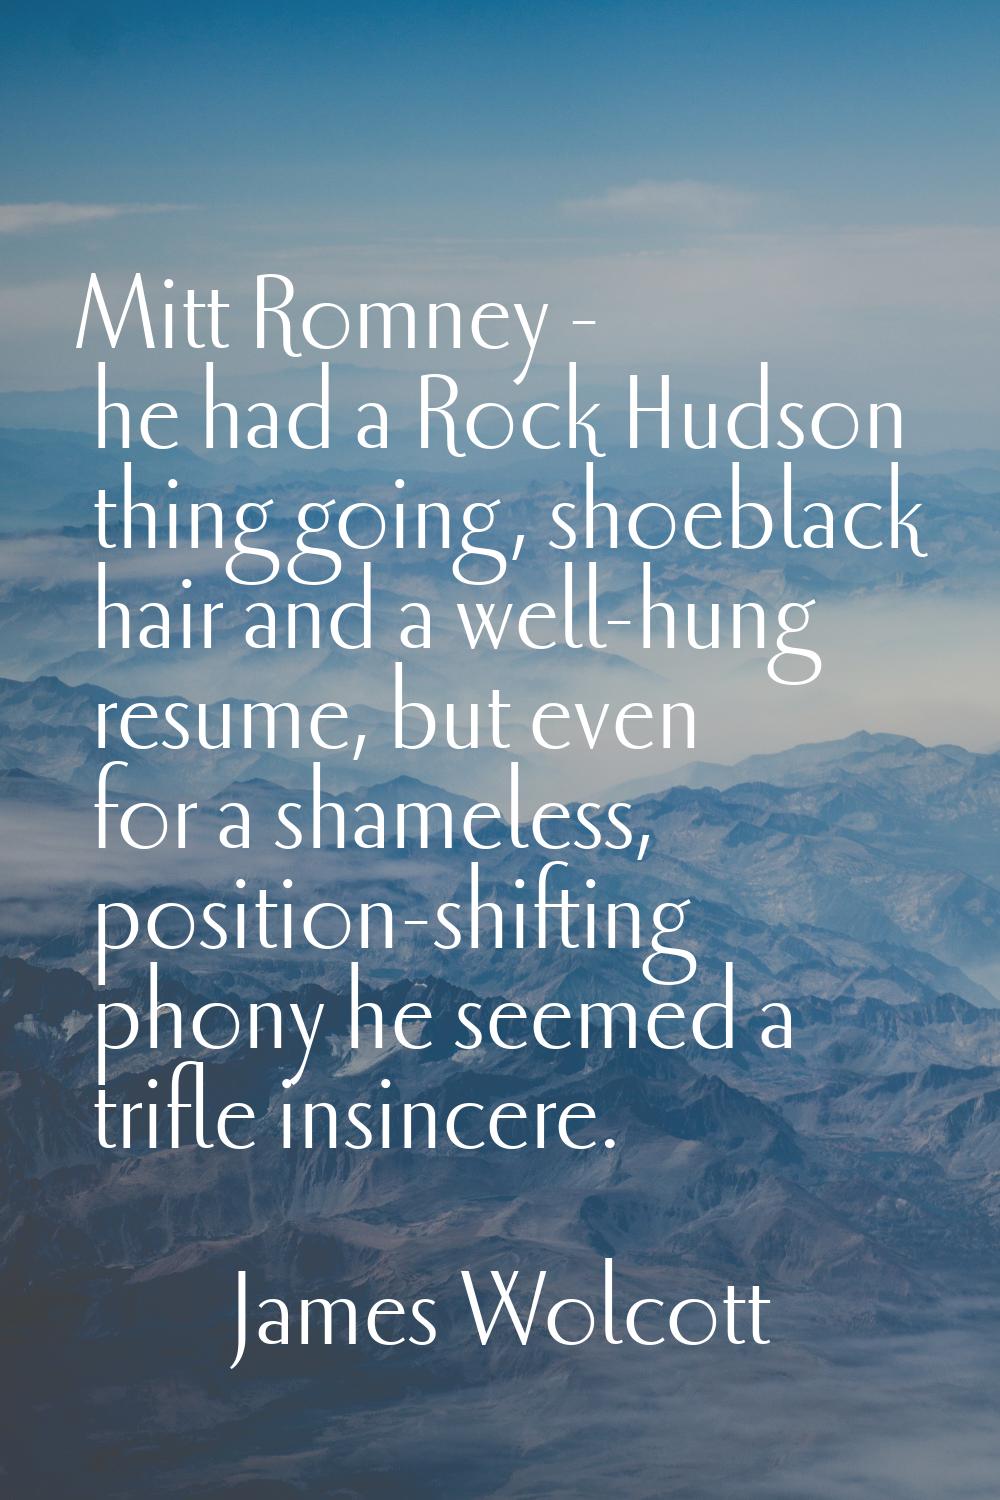 Mitt Romney - he had a Rock Hudson thing going, shoeblack hair and a well-hung resume, but even for